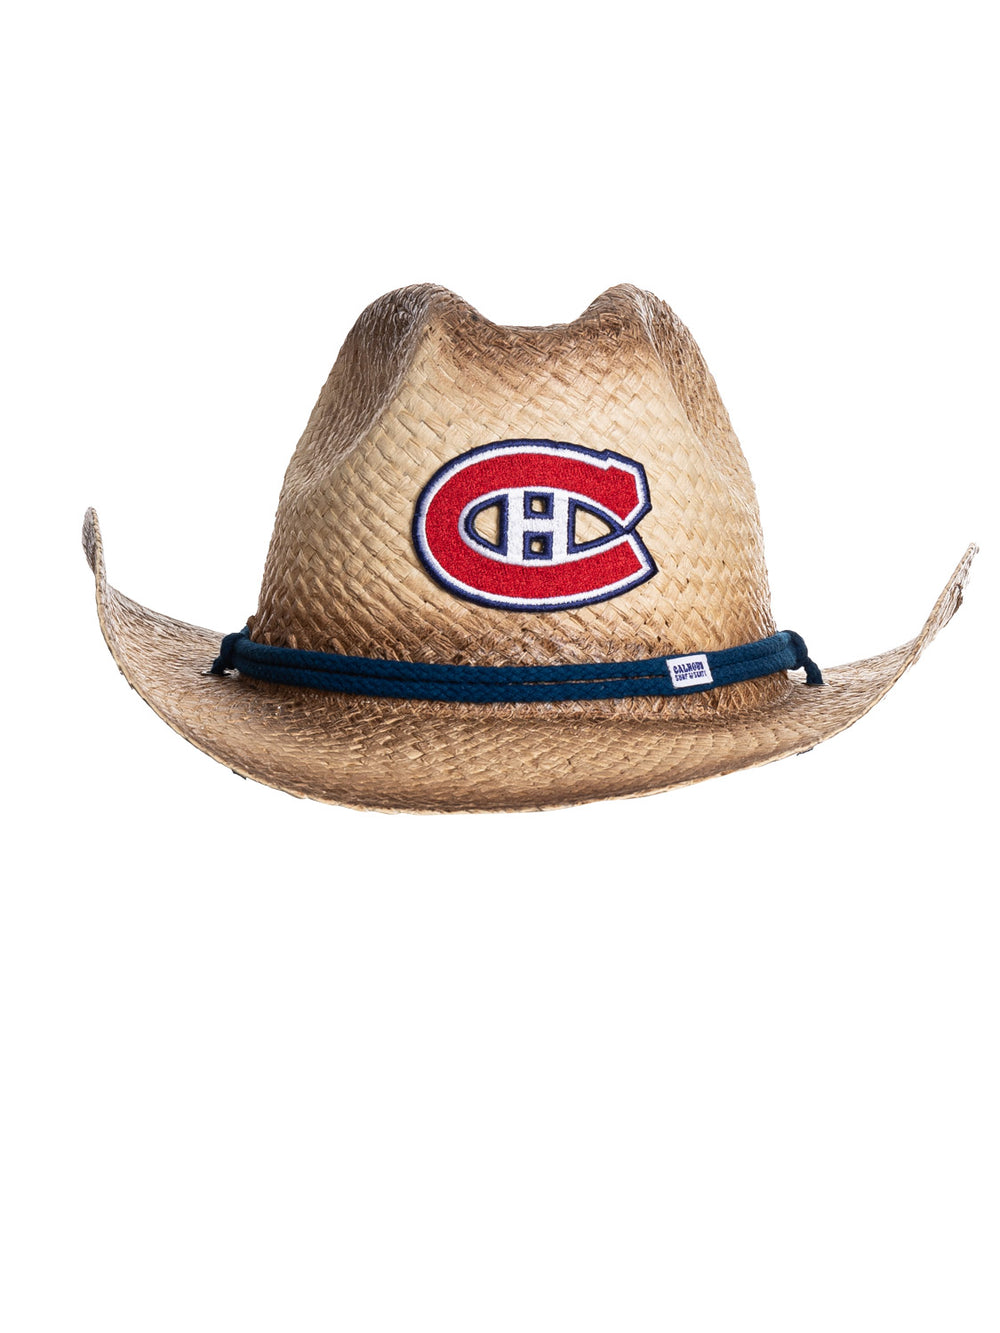 The front of the Montreal Canadiens straw cowboy hat. It is a tan straw hat with the Canadiens logo in the centre of it, with a navy blue rope running along the crown of the hat.